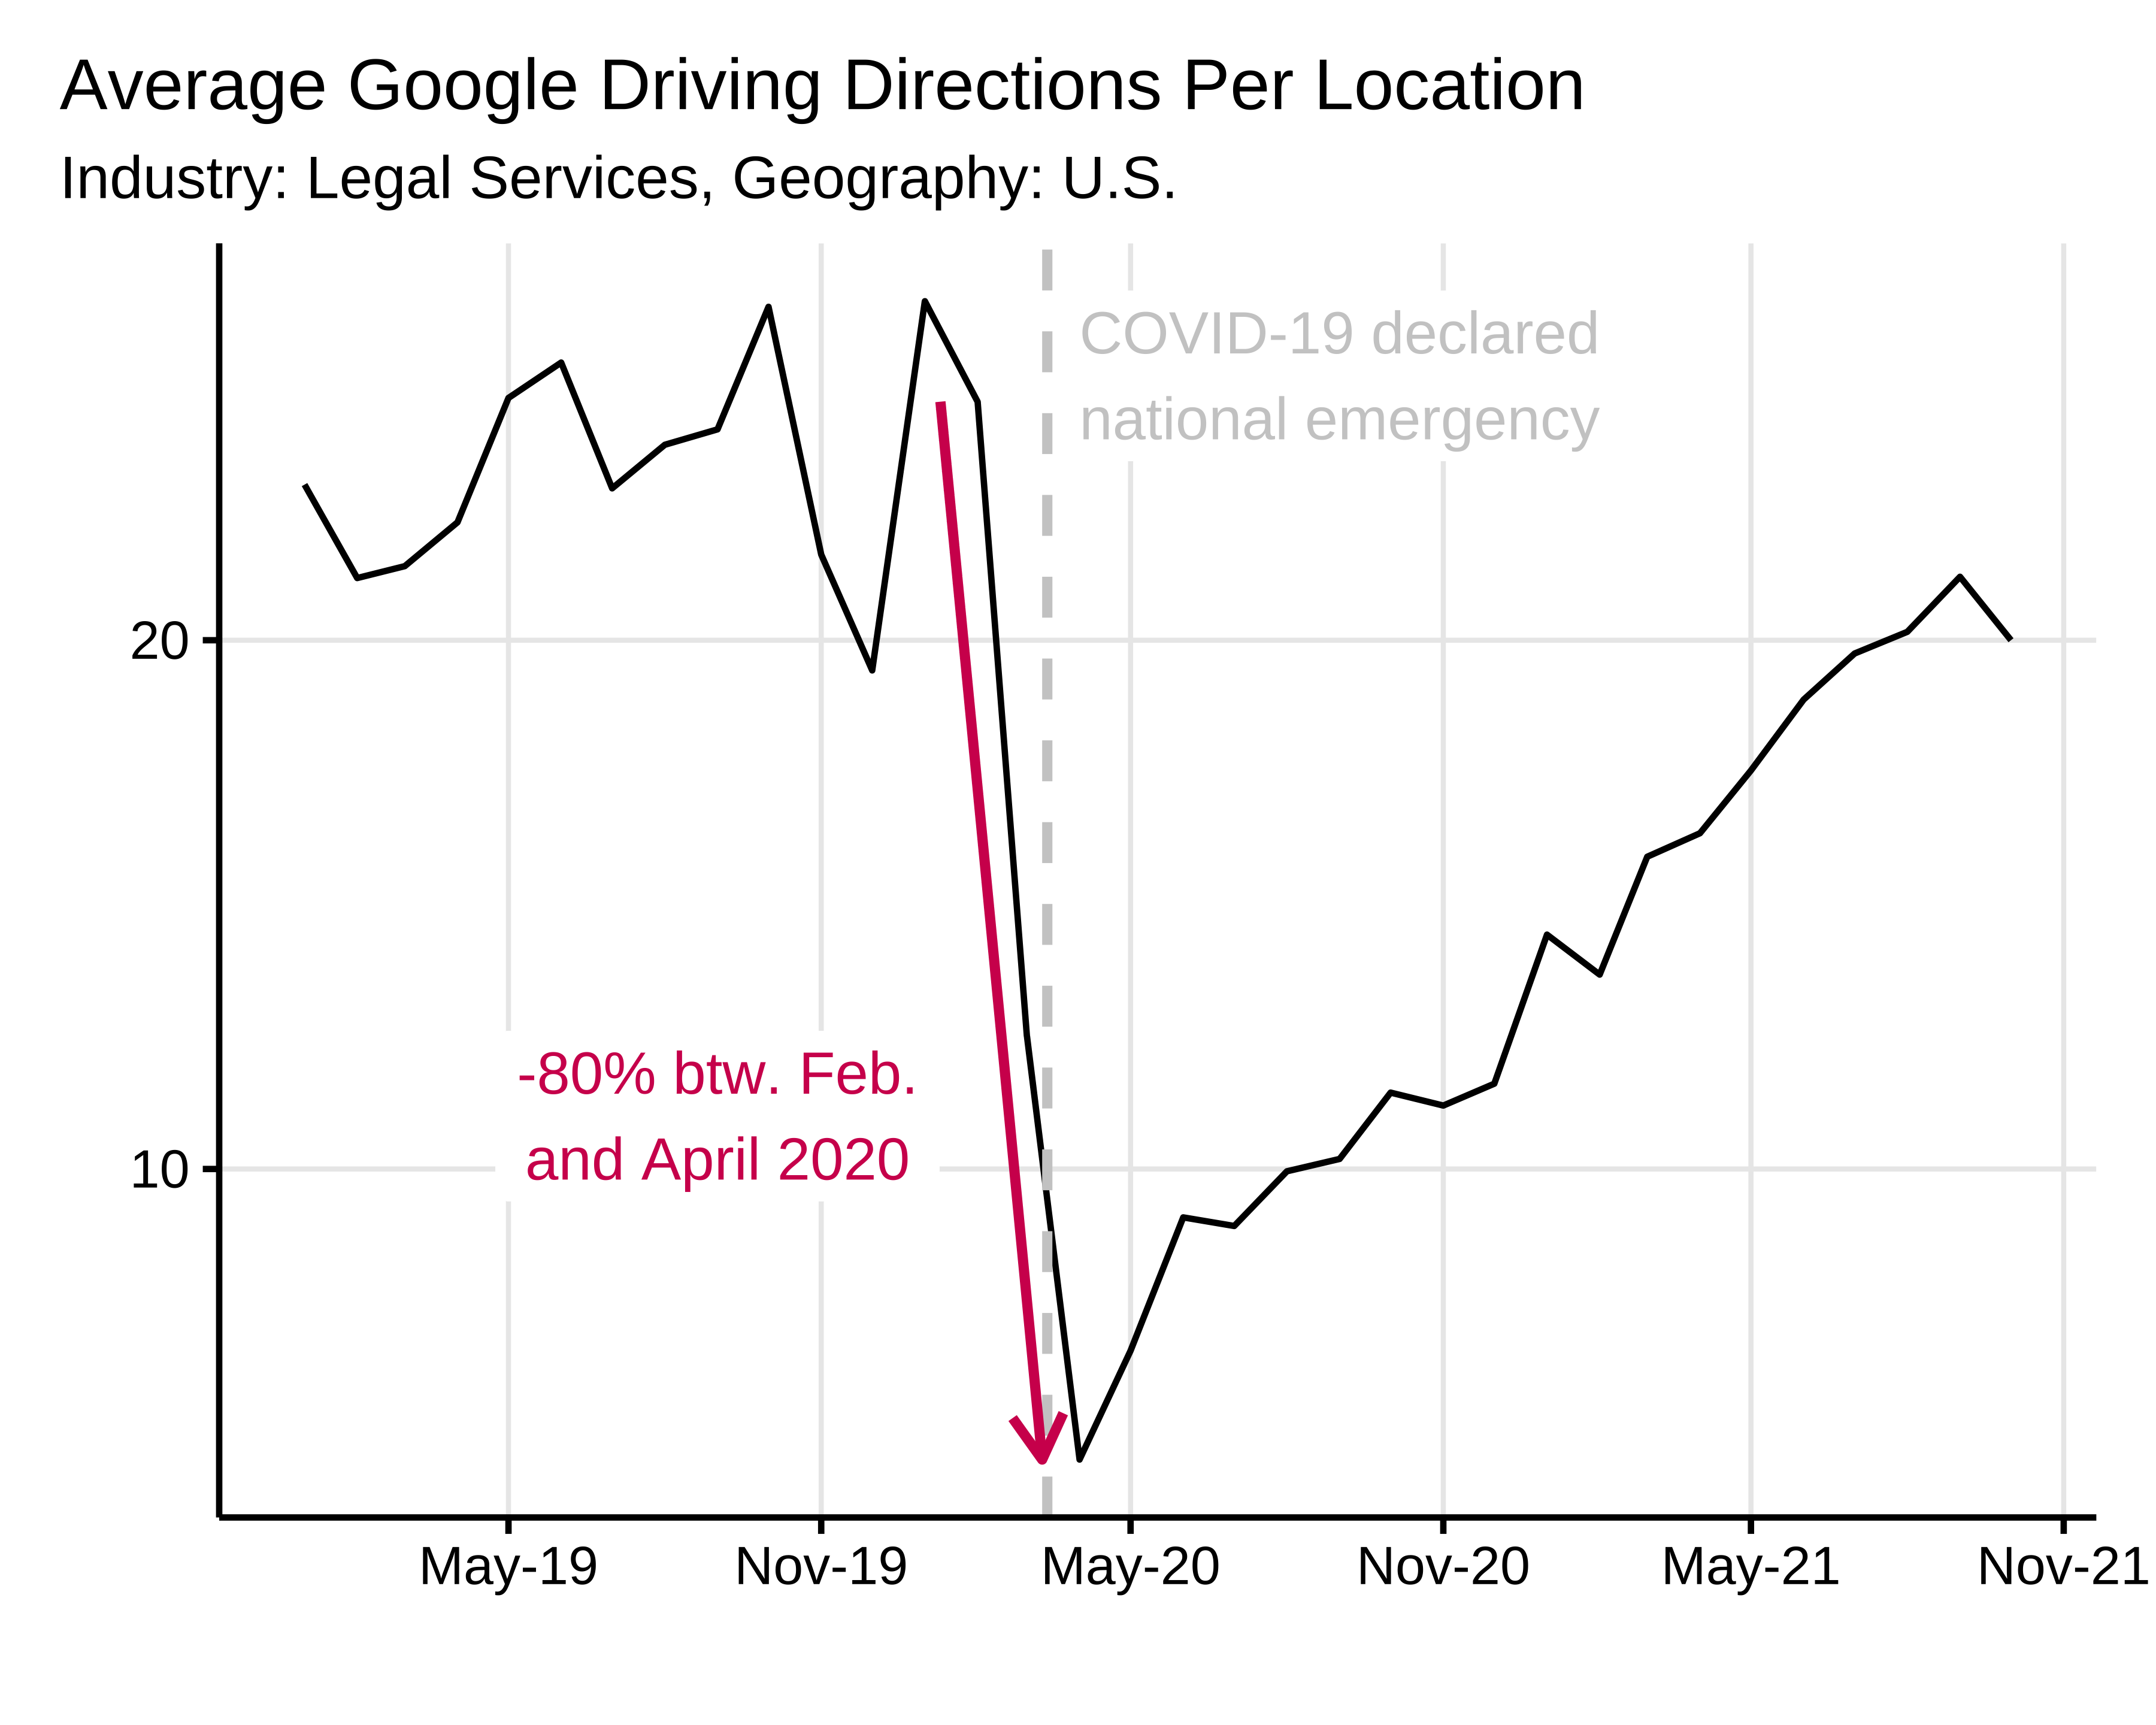 The average Google driving directions level is back to pre-covid at the end of 2021.